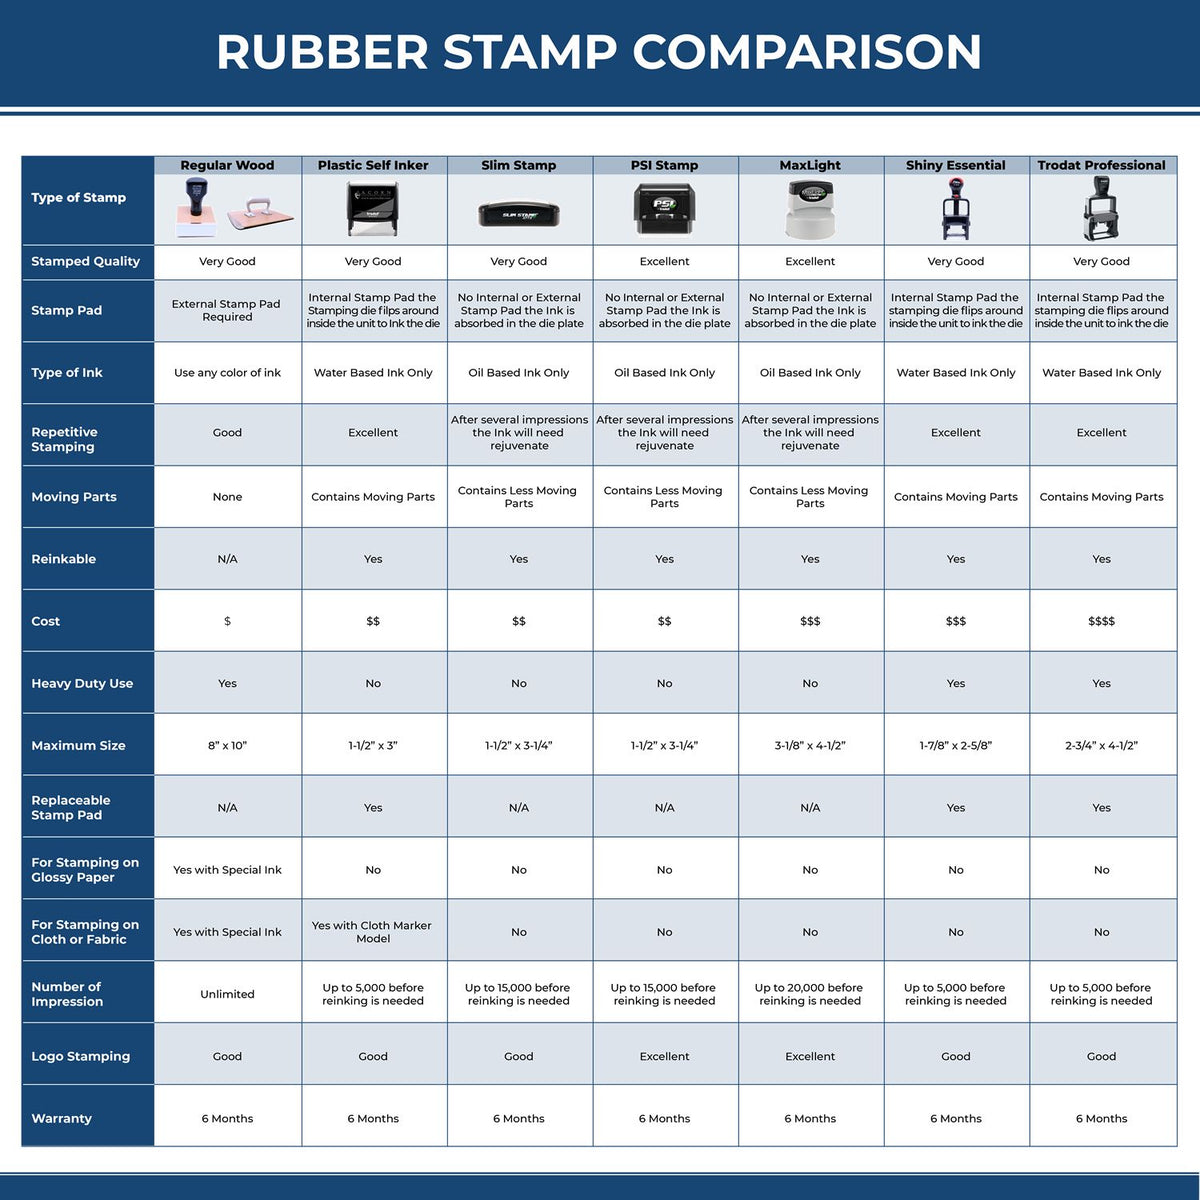 Large Pre-Inked Global Express Guaranteed Stamp 4966SLIM Rubber Stamp Comparison